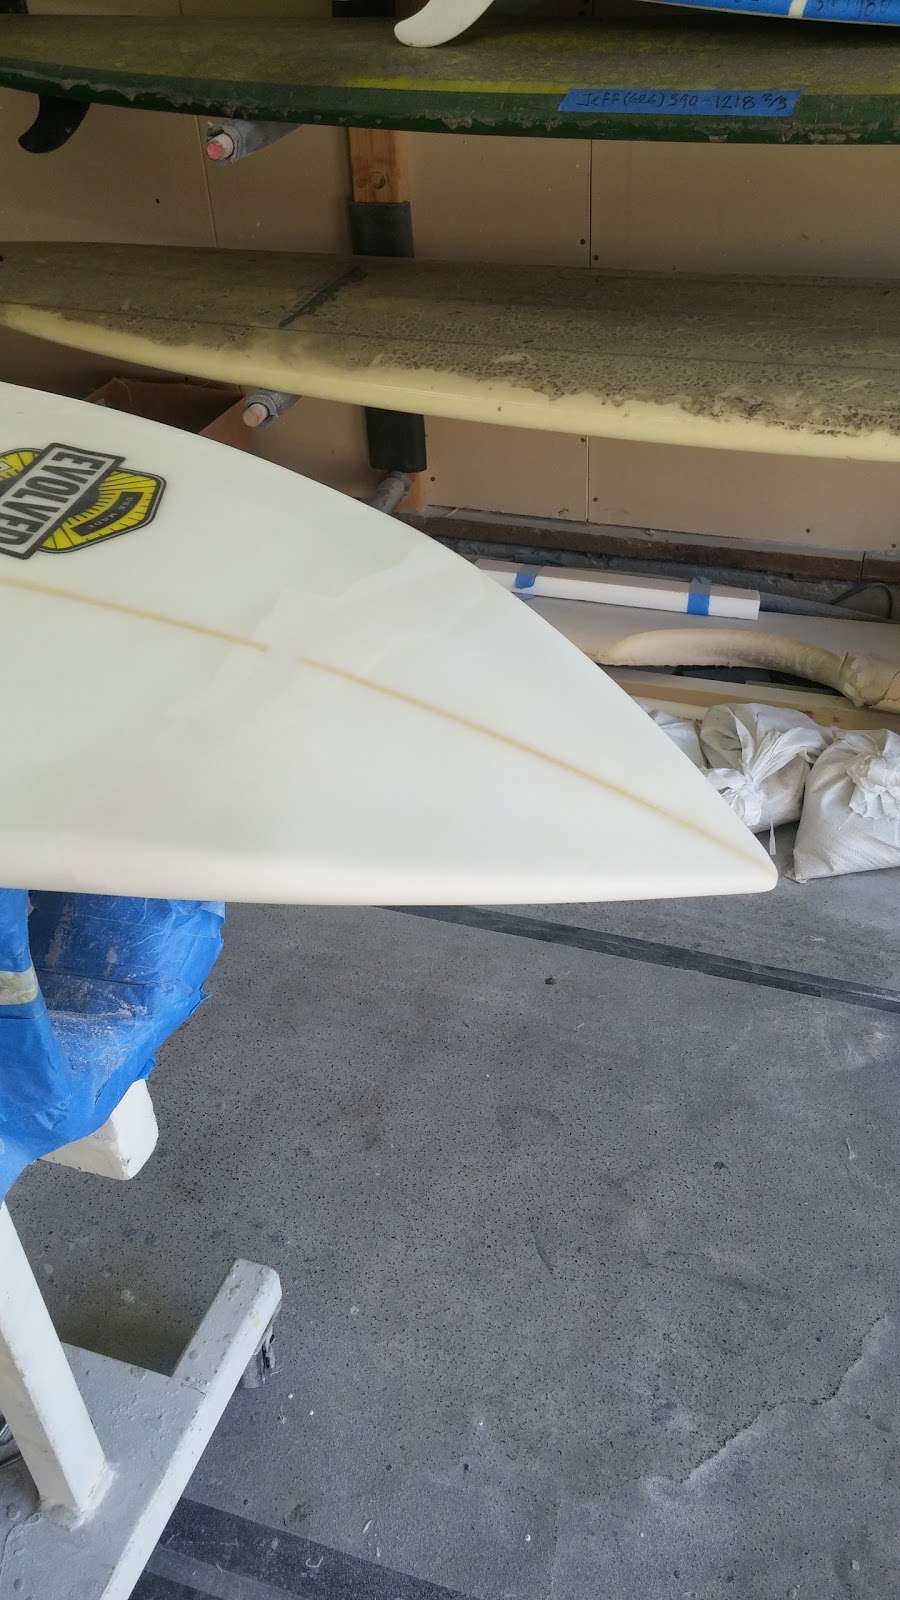 AB Surfboard Repair/AB Pro Glassing/AB Pro Surfboard Designs | Studebaker Rd/Stearns Ave, Long Beach, CA 90815, USA | Phone: (424) 221-1069